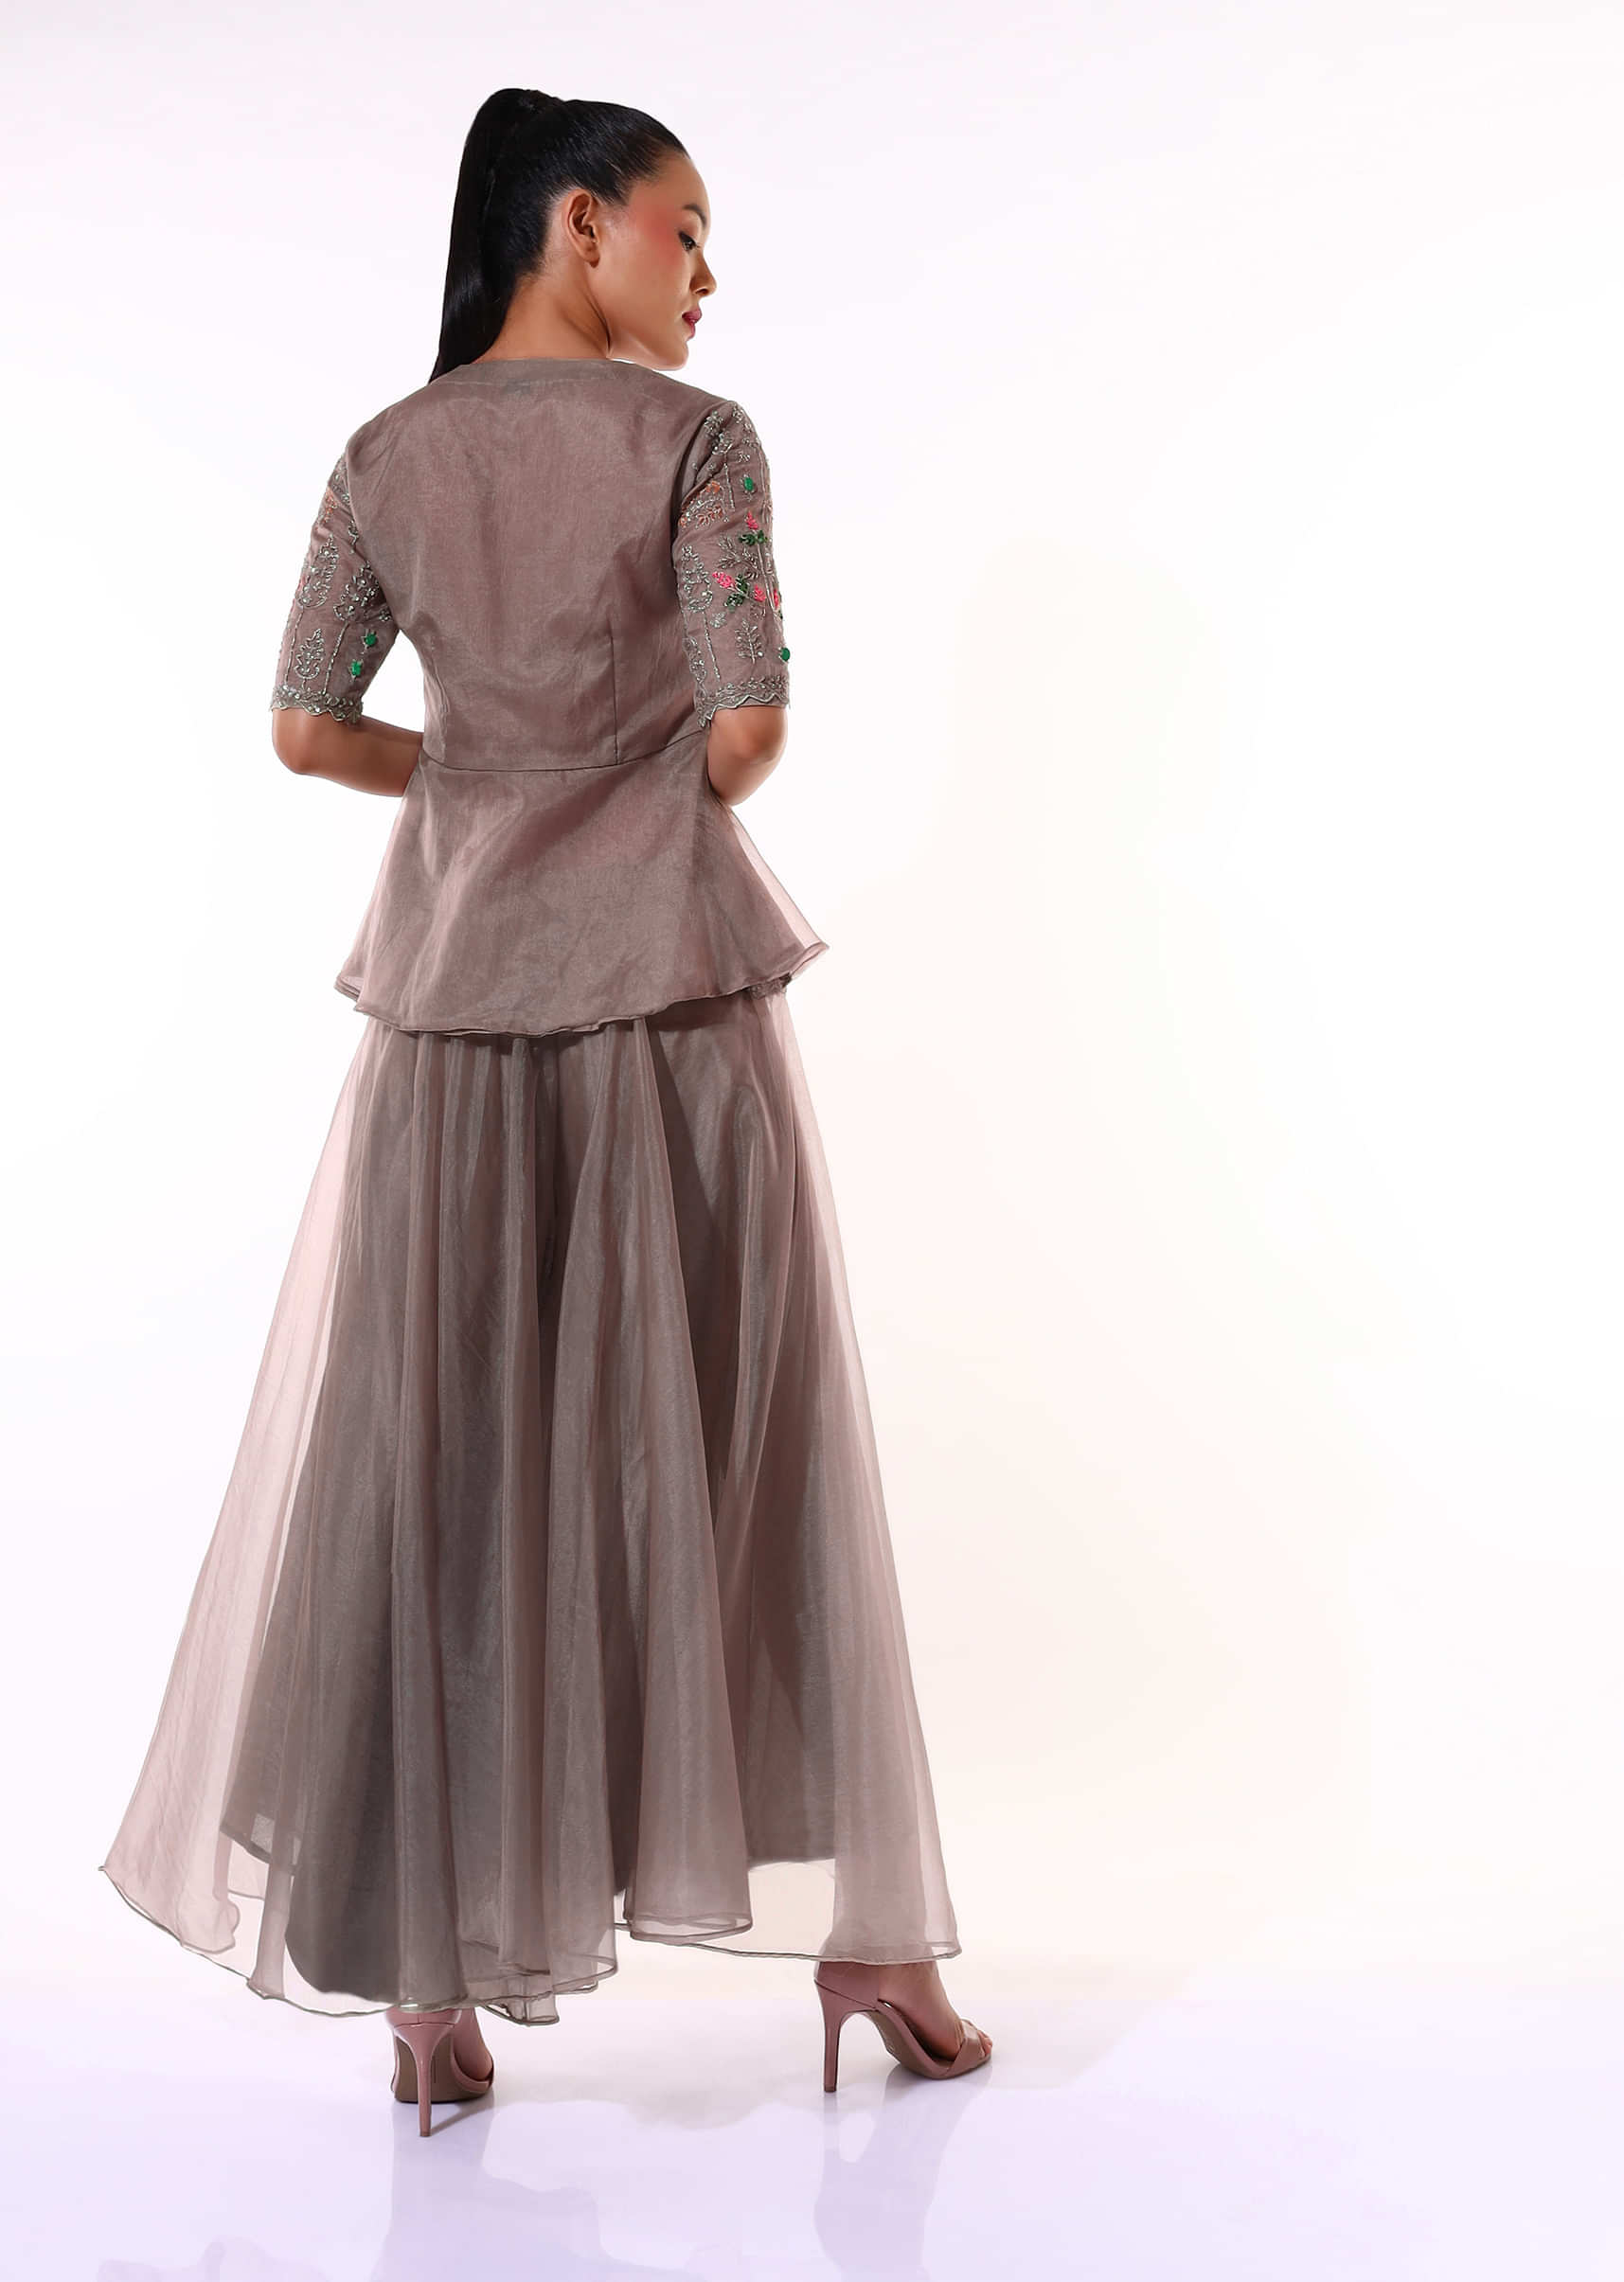 Dusty Brown Palazzo Suit In Organza With A Matching Peplum Top Adorned In Zari And Thread Embroidery